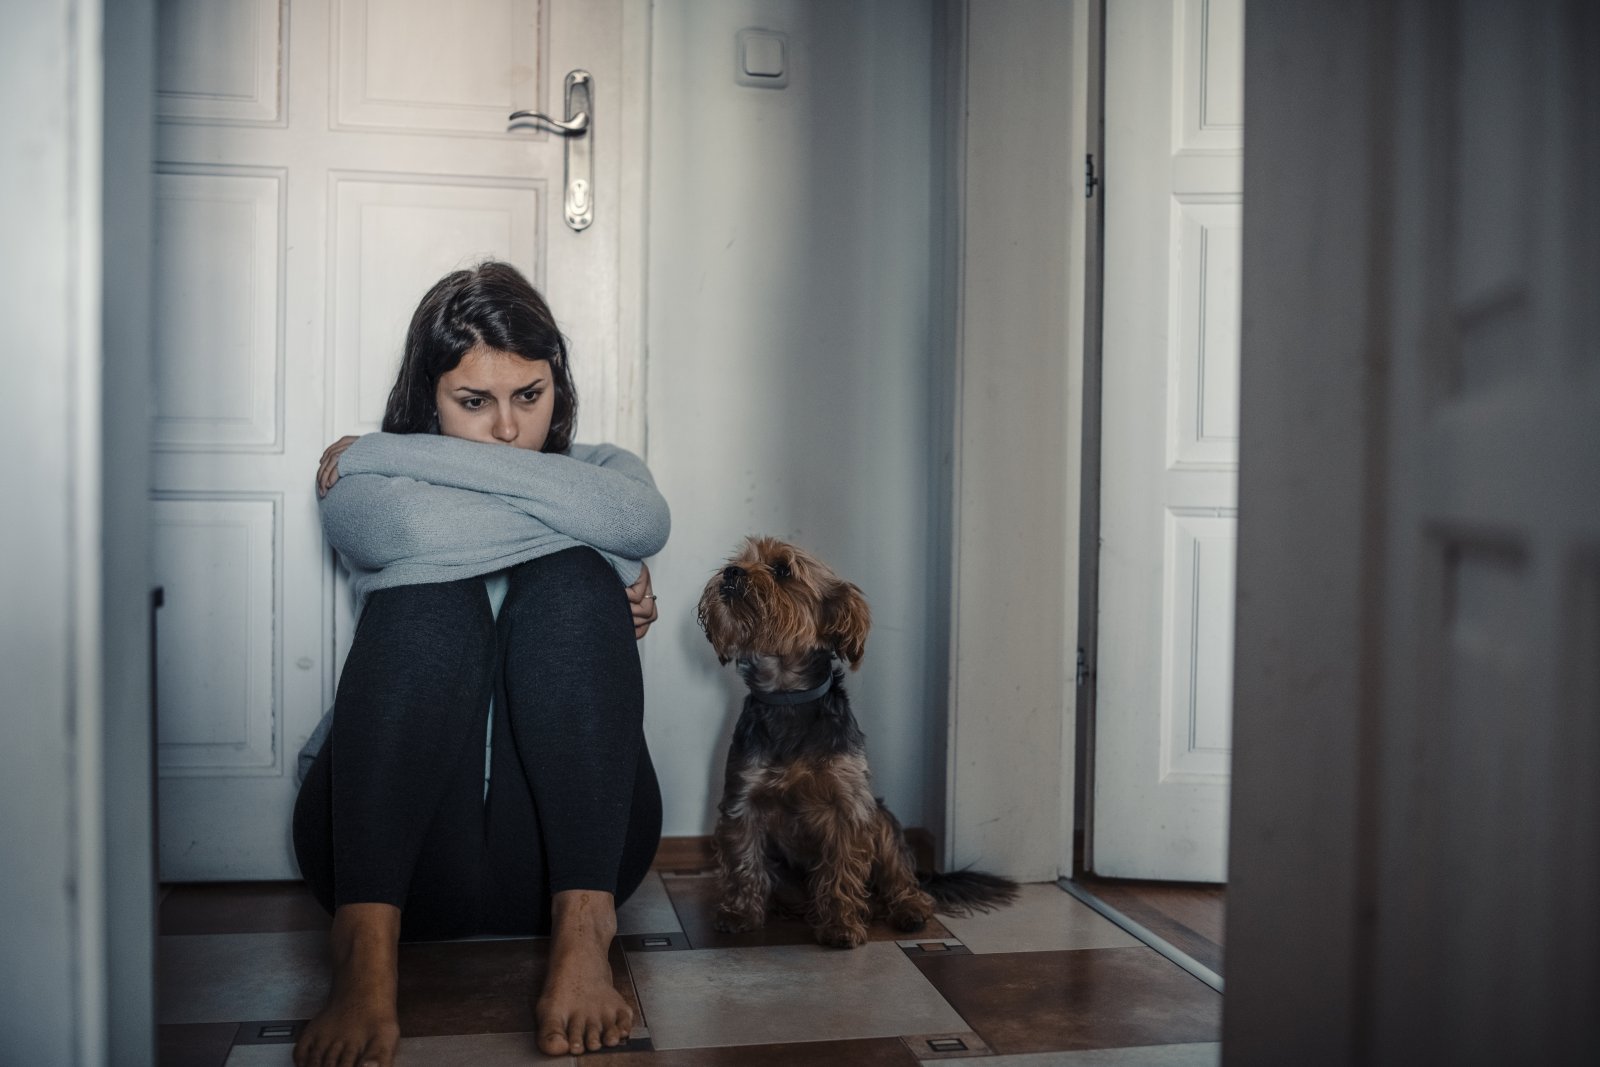 Woman With A Mental Health Problems Is Sitting Exhausted On The Floor With Her Dog Next To Her